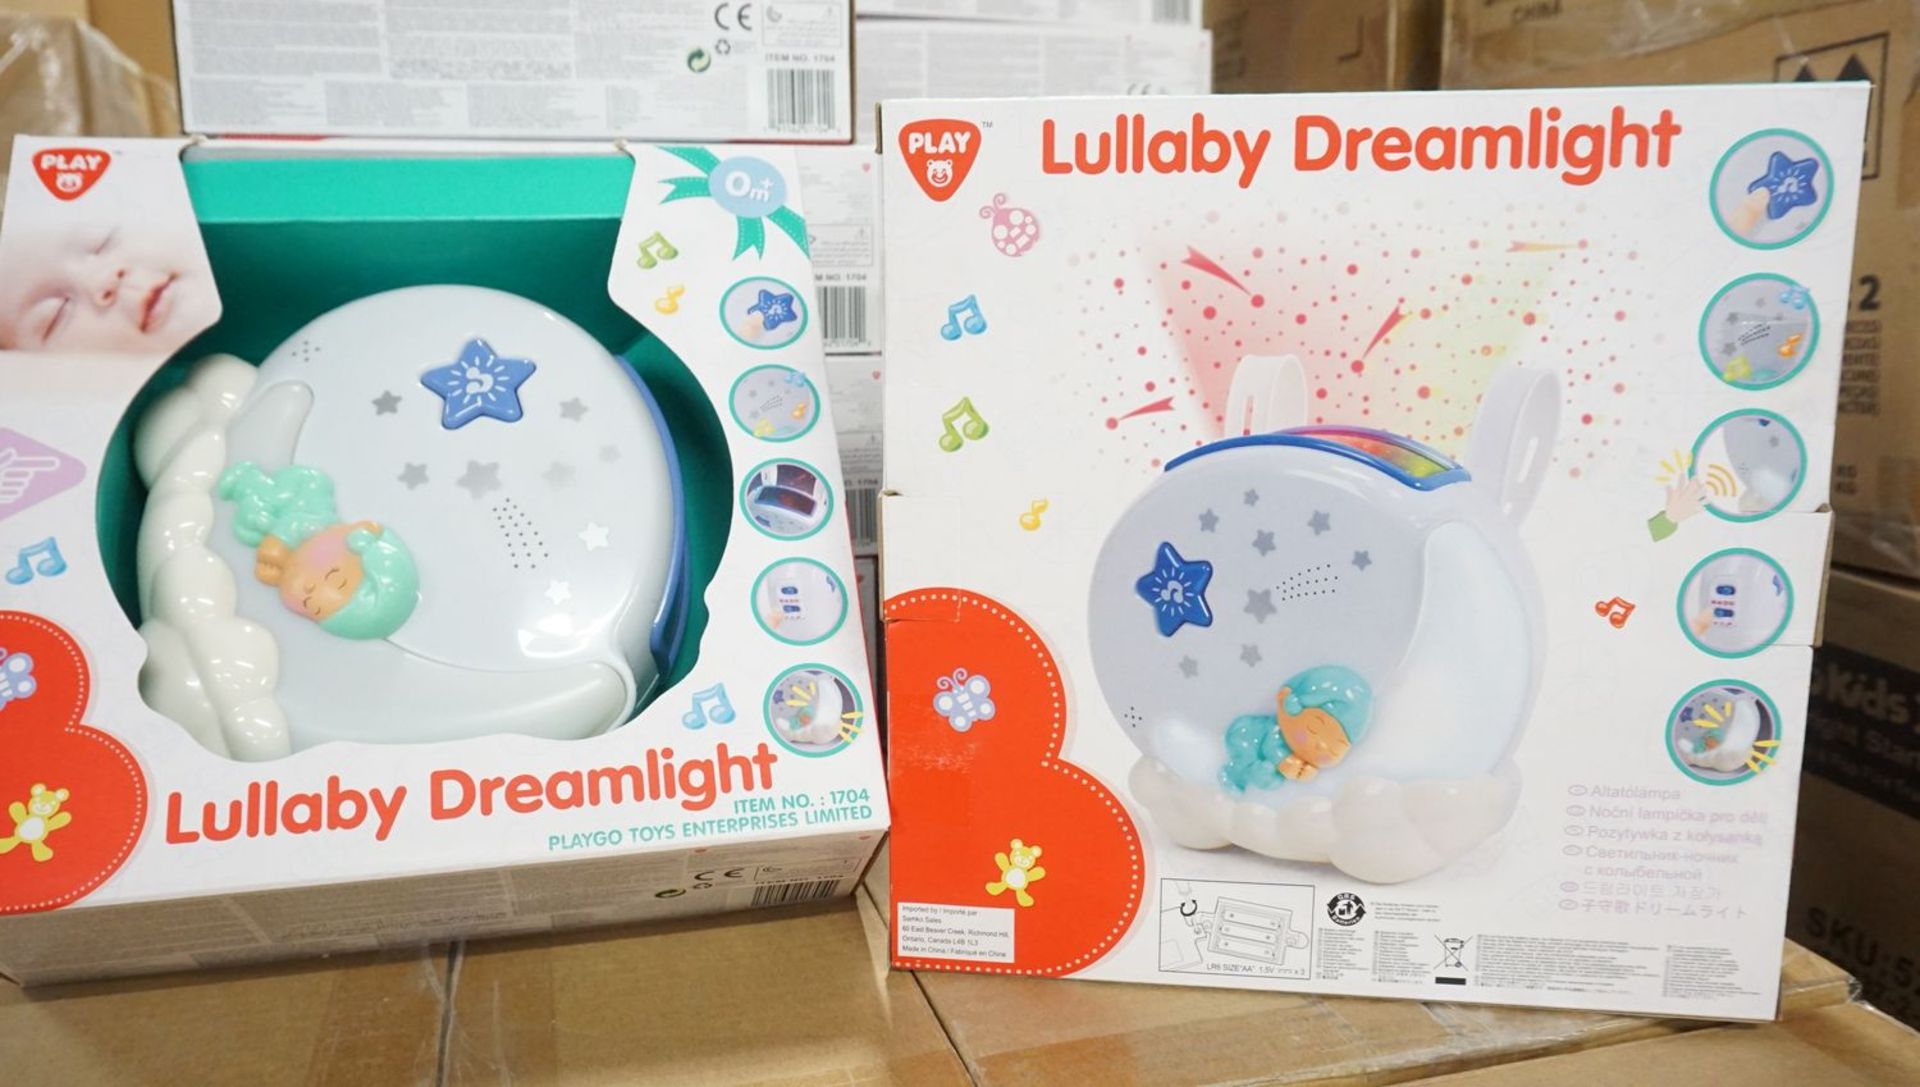 BOXES - PLAY LULLABY DREAM LIGHT (6 PCS/BOX) (21 BOXES & 20 LOOSE) - Image 2 of 2